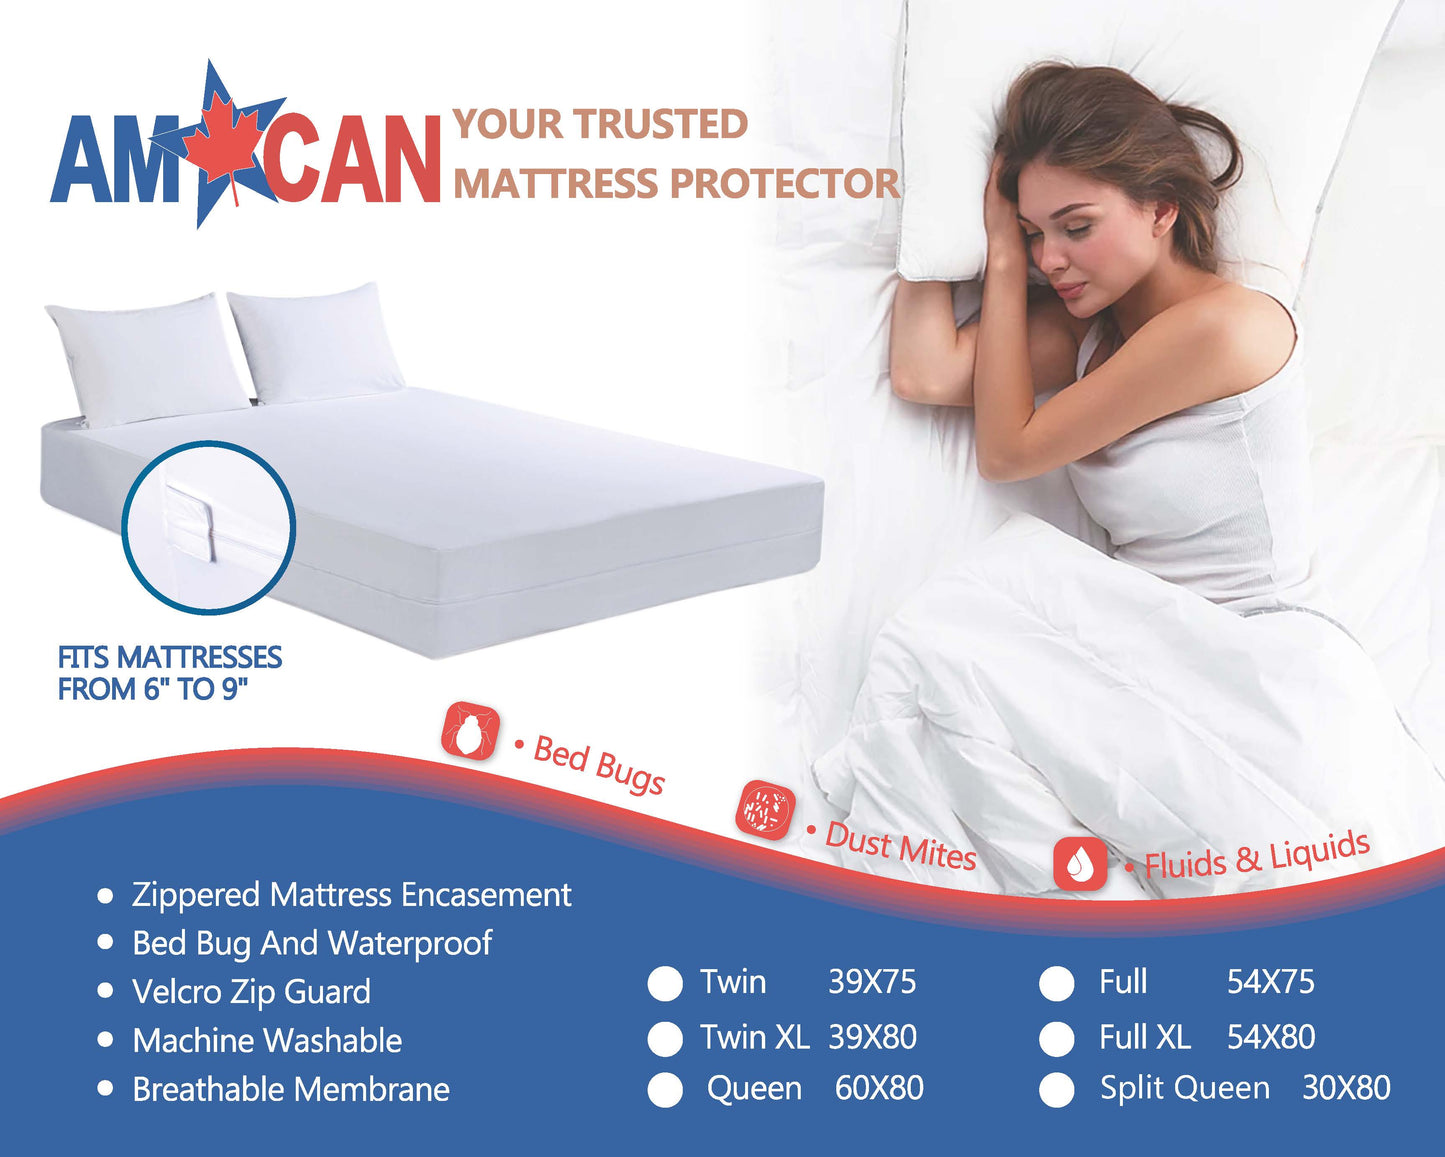 Low-Profile Zippered Mattress Covers (Fits 6”-9”)